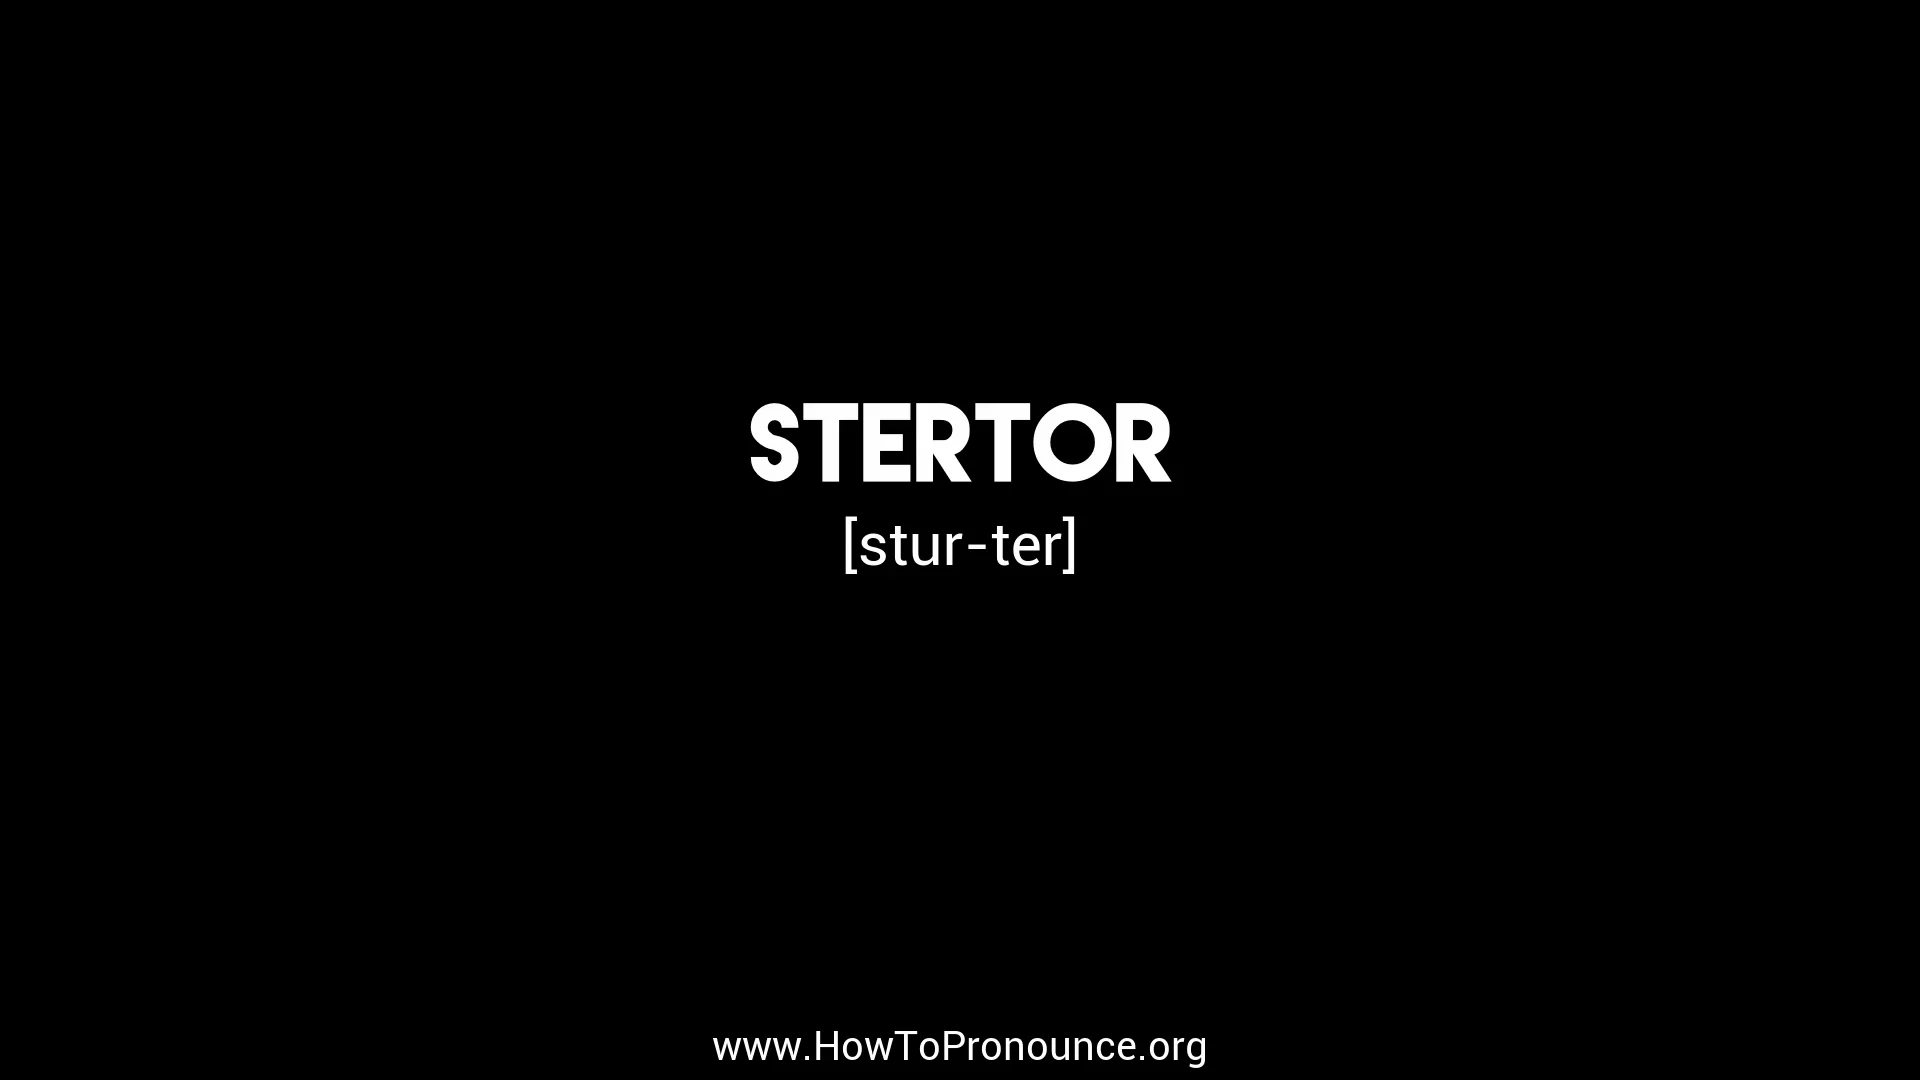 How to Pronounce stertor on Vimeo